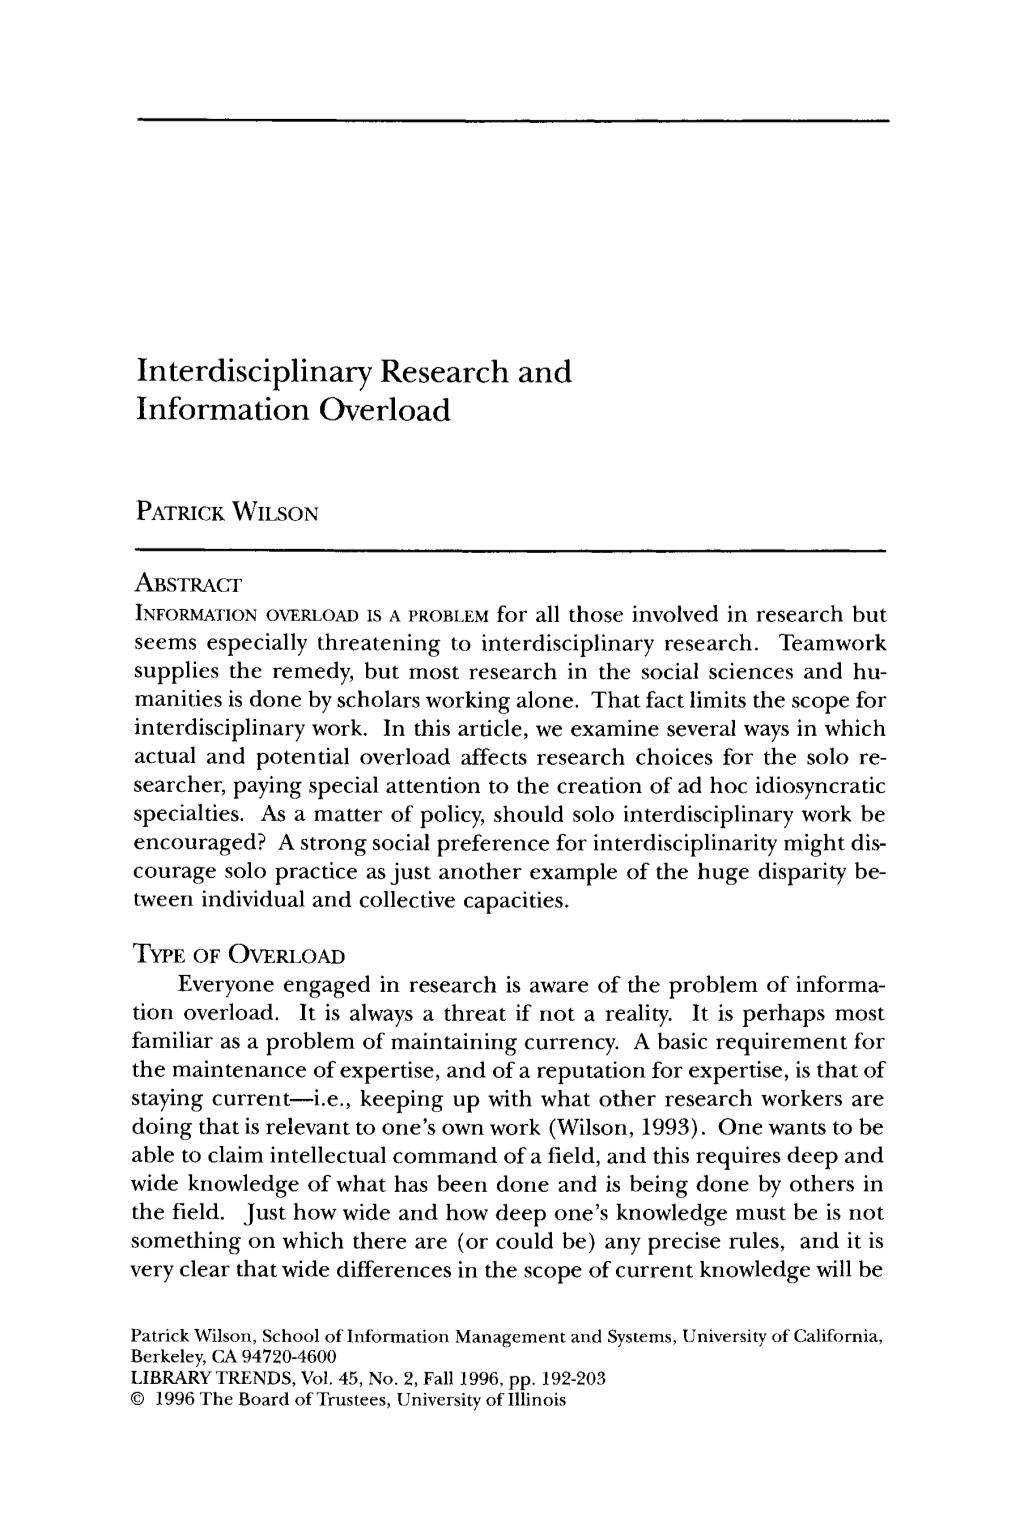 Interdisciplinary Research and Information Overload